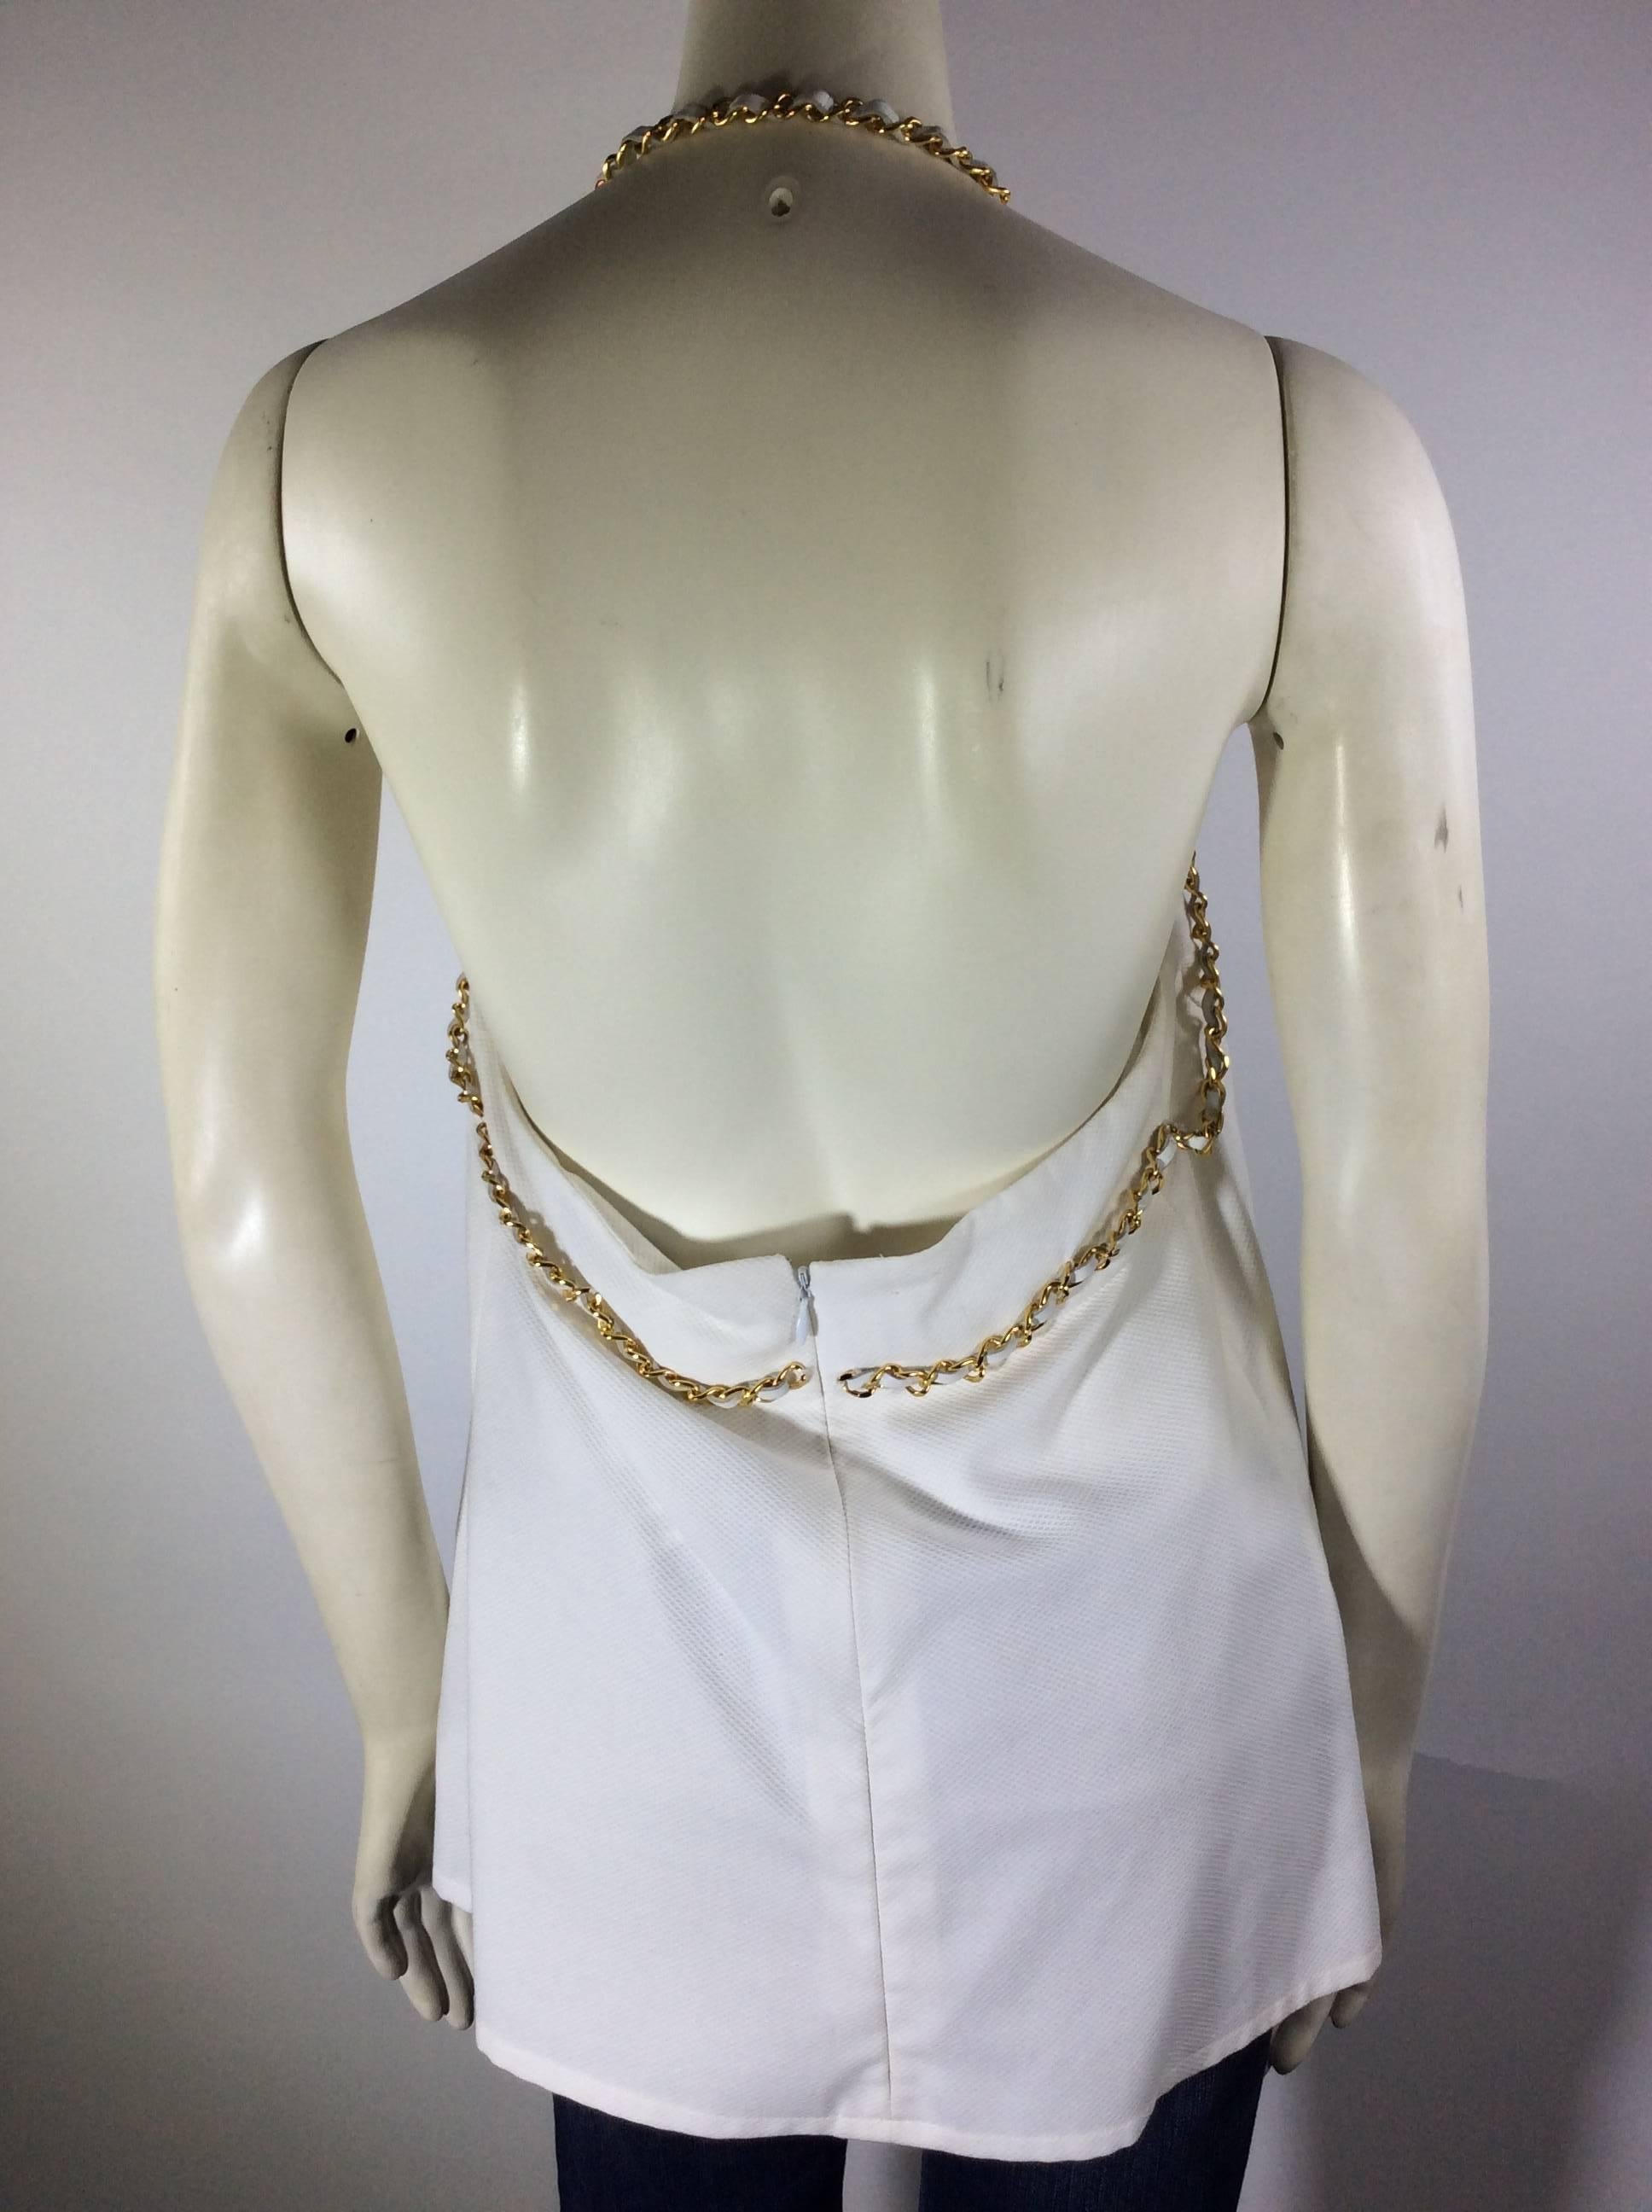 Women's Chanel White with Gold Chain Top For Sale